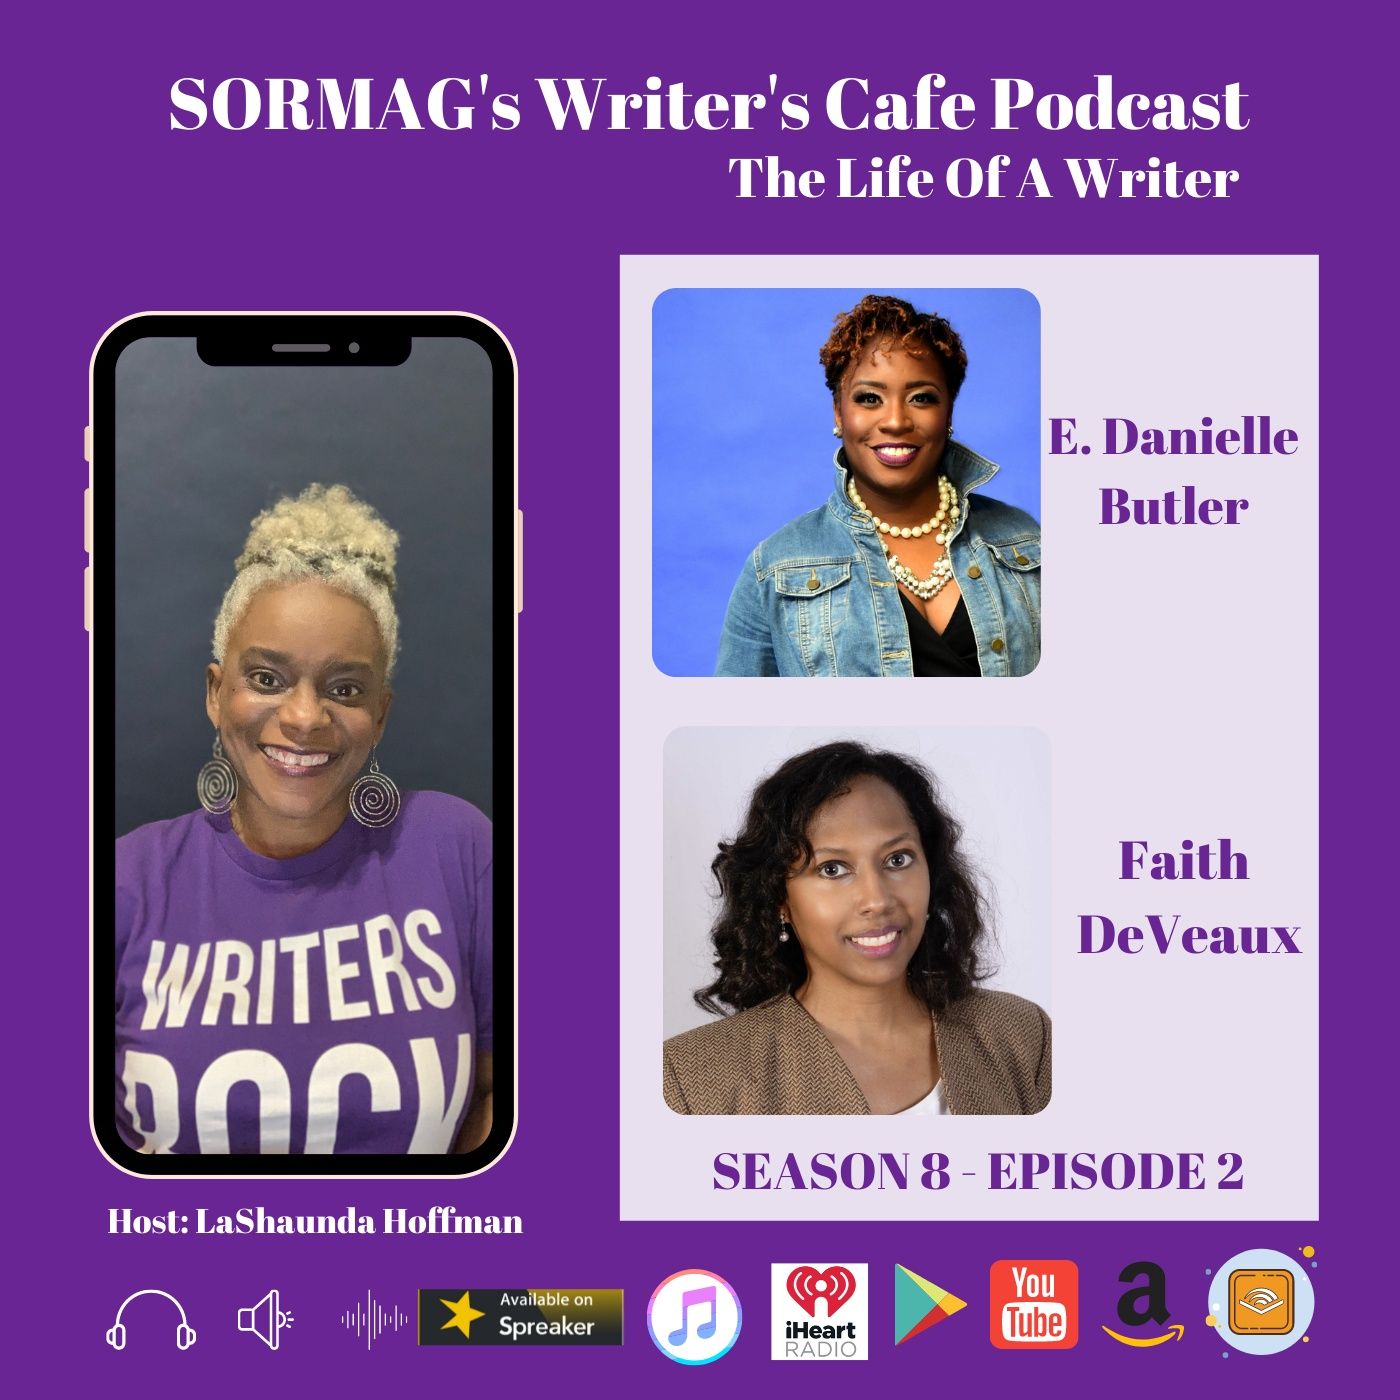 SORMAG’s Writer’s Café Podcast S8 E2 – Life Of A Writer – Conversations with E. Danielle Butler And Faith DeVeaux